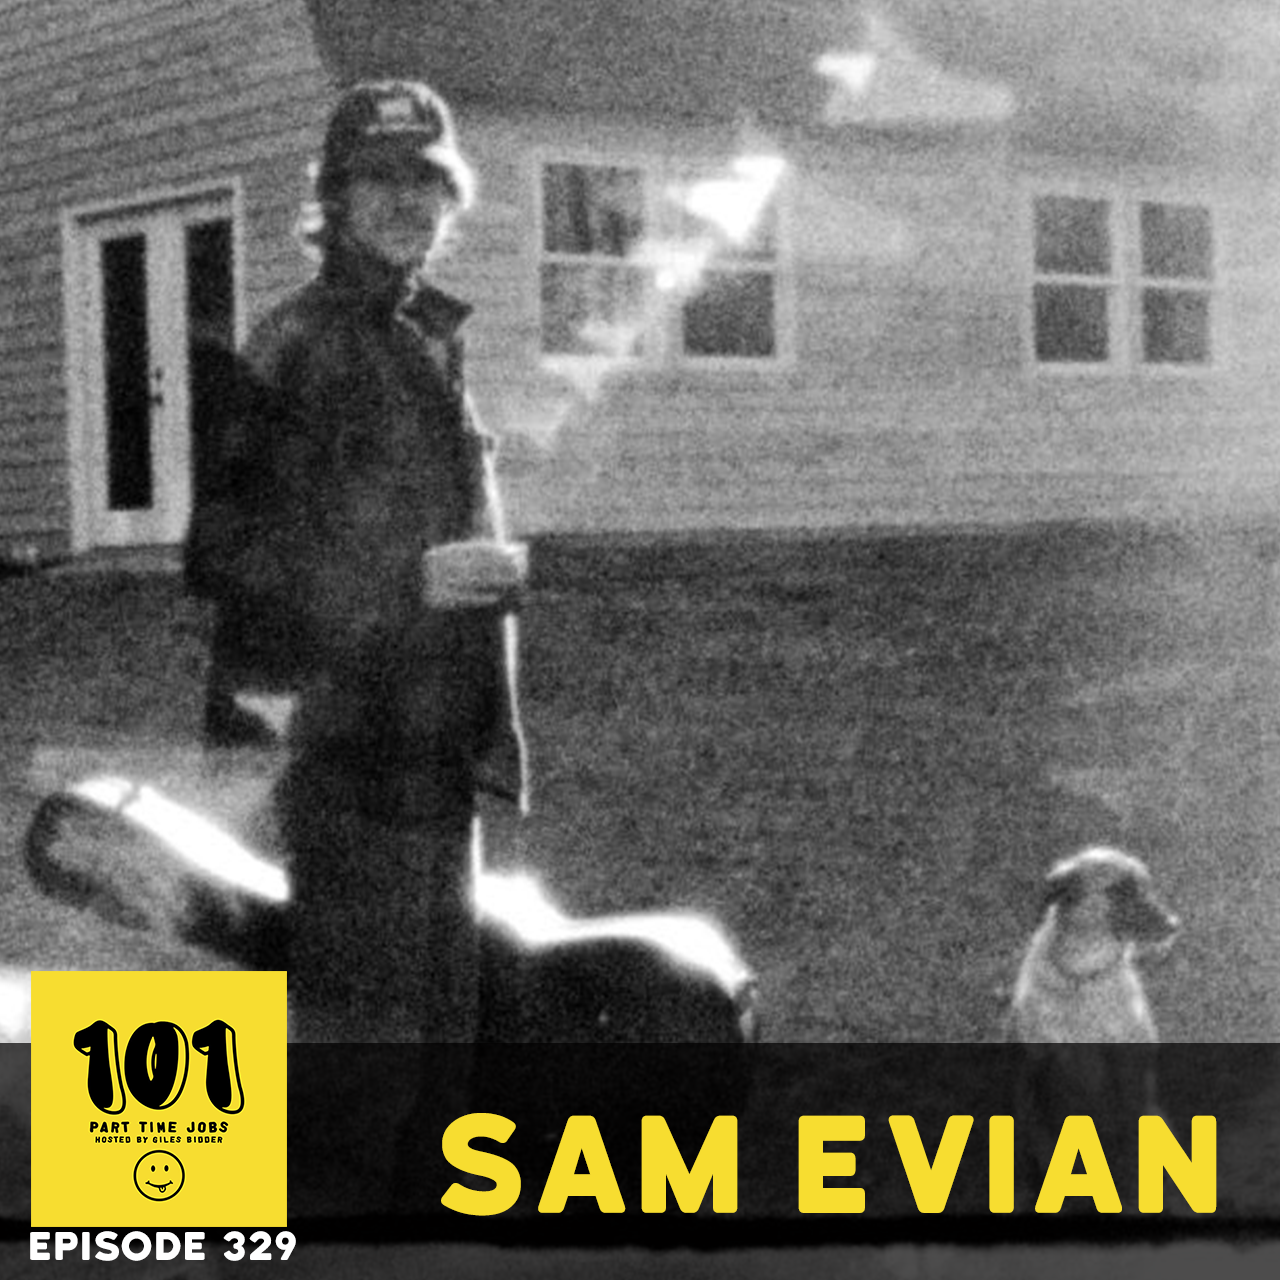 Episode Sam Evian "We didn't sell the fish"